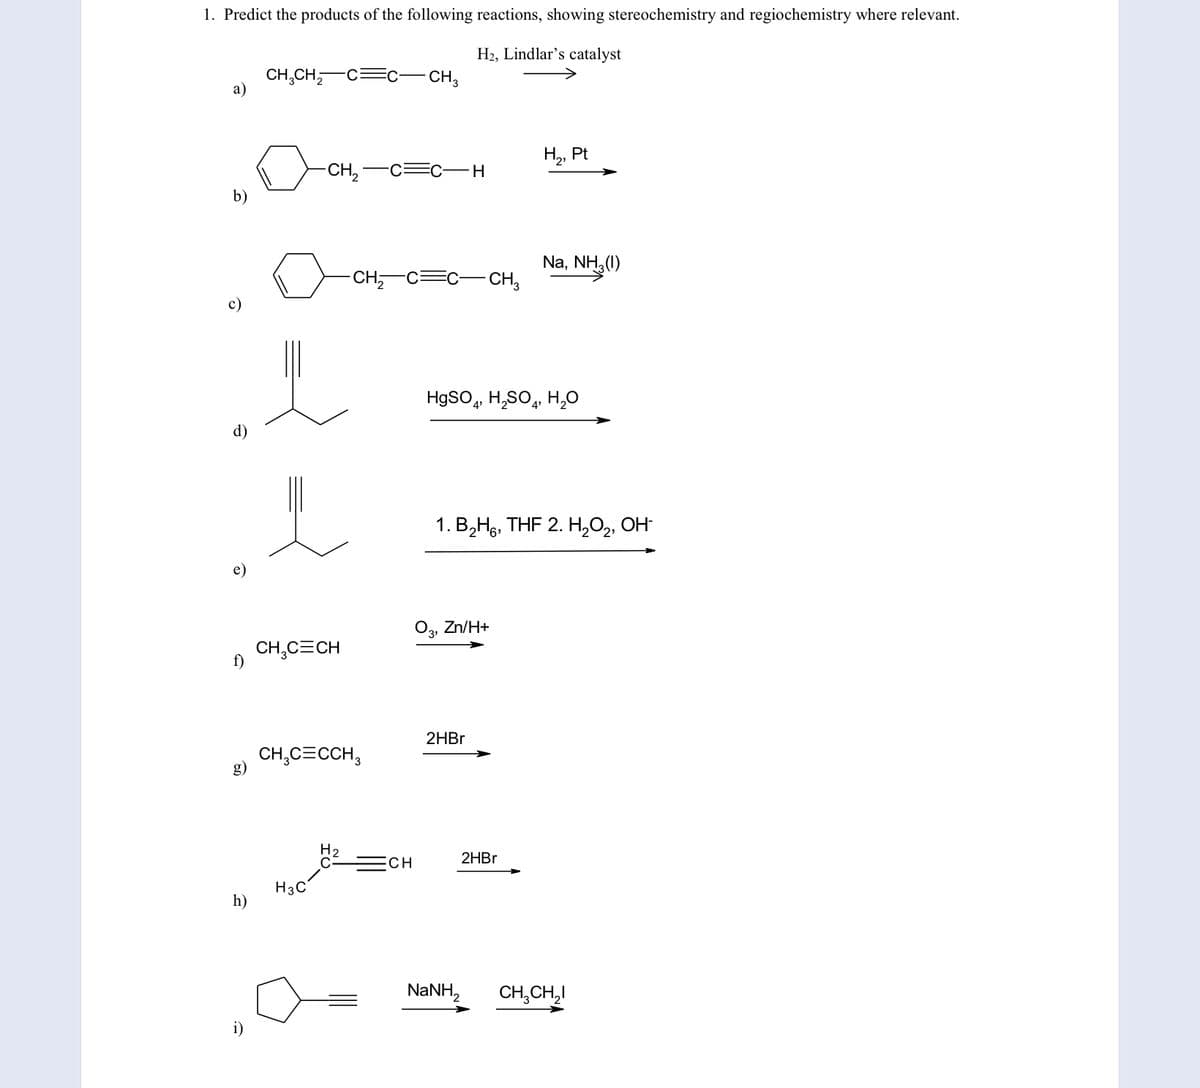 1. Predict the products of the following reactions, showing stereochemistry and regiochemistry where relevant.
H2, Lindlar's catalyst
CH,CH,-C
a)
- CH3
H2, F
Pt
CH,
C=c-H
b)
Na, NH3(1)
-CH,-C=C- CH,
HgSO, H,SO, H,0
d)
1. В,На, THF 2. Н,О, ОН
e)
Zn/H+
3'
CH,C=CH
f)
2HBR
CH,C=CCH,
g)
CH
2HB.
H3C
h)
NANH,
CH,CH,I
i)
